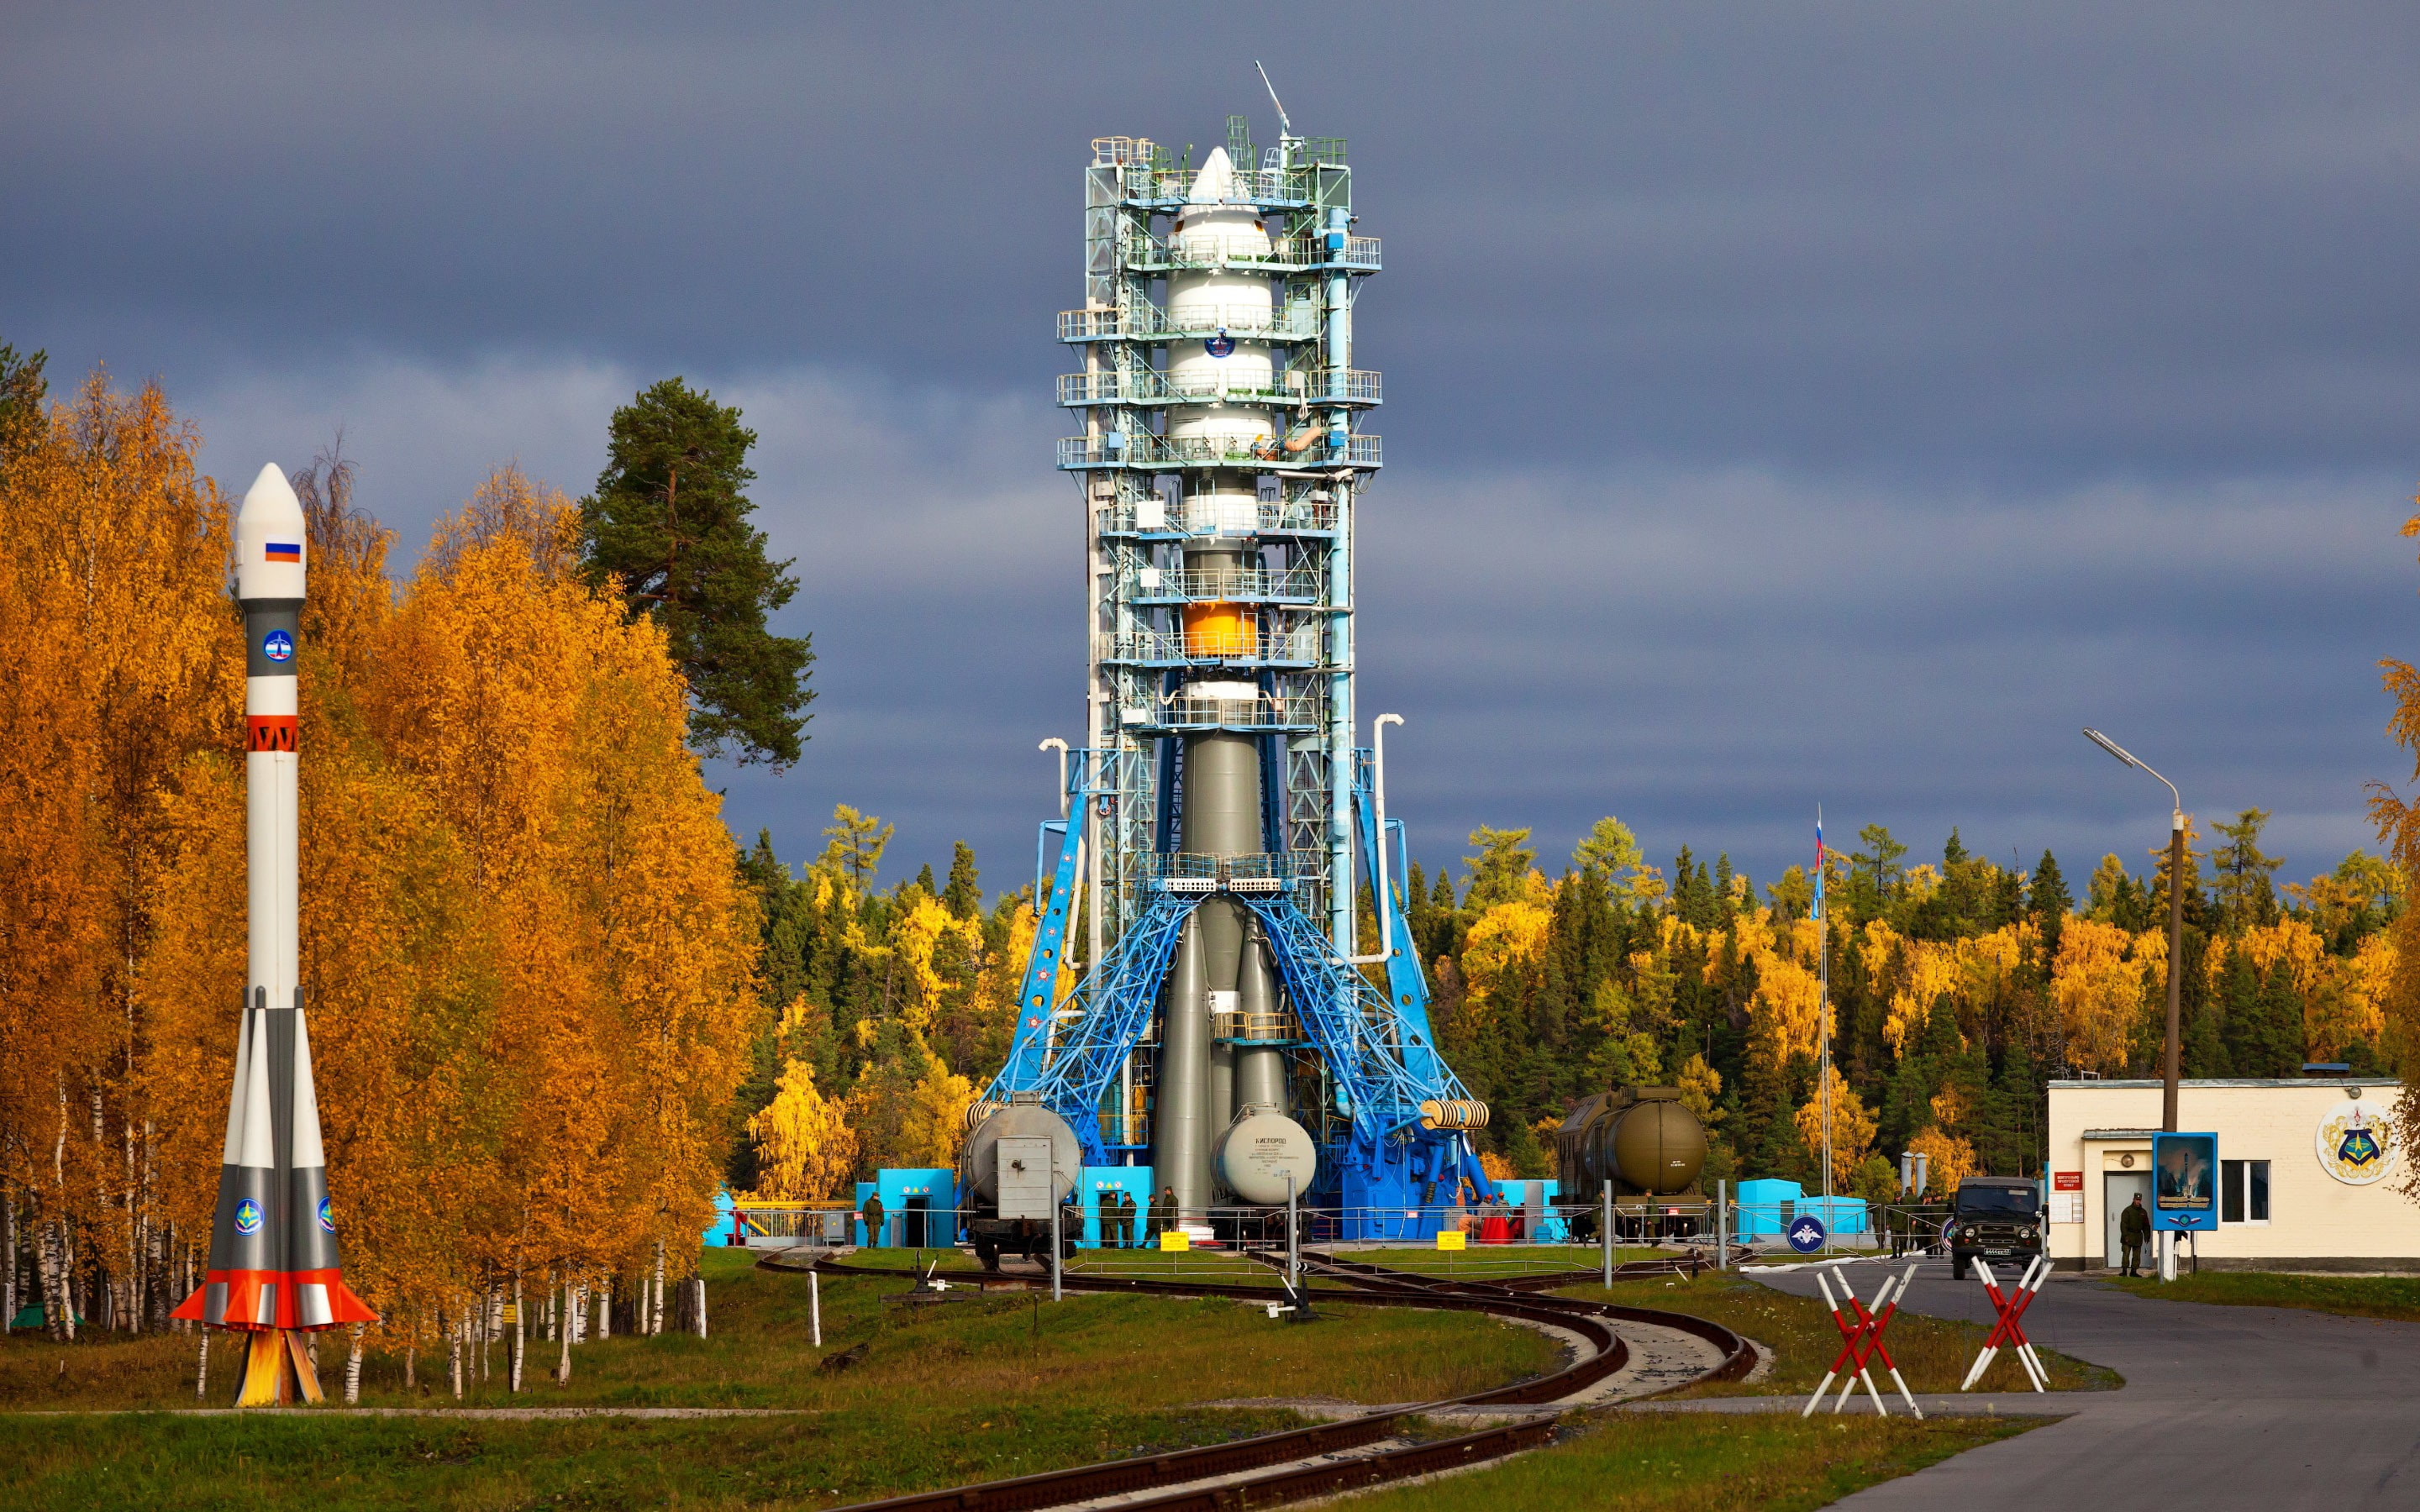 rocket, clouds, Russian, trees, technology, soldier, Plesetsk cosmodrome